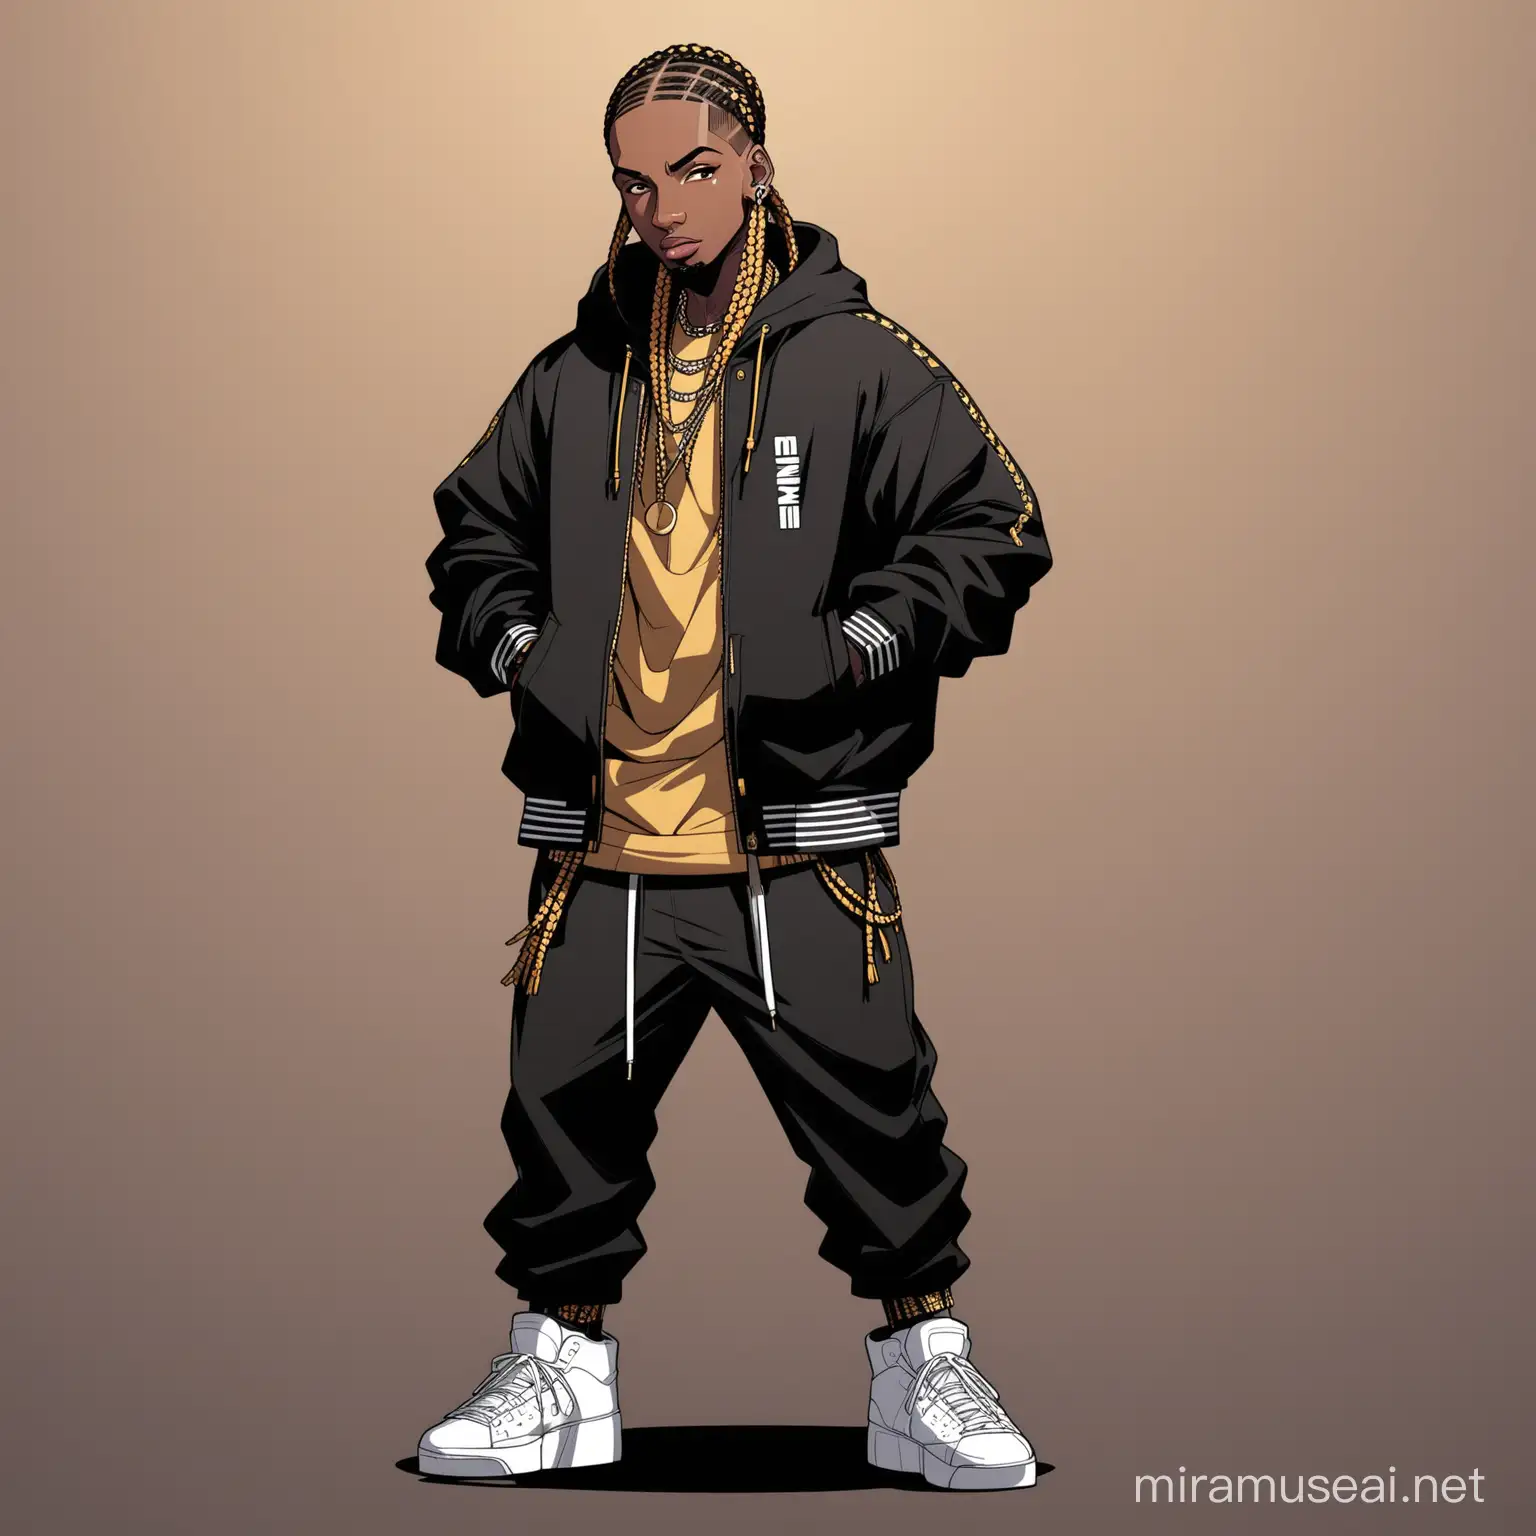 Animated Black Man Rapper with Cornrow Hairstyle Vibrant Full Body Illustration